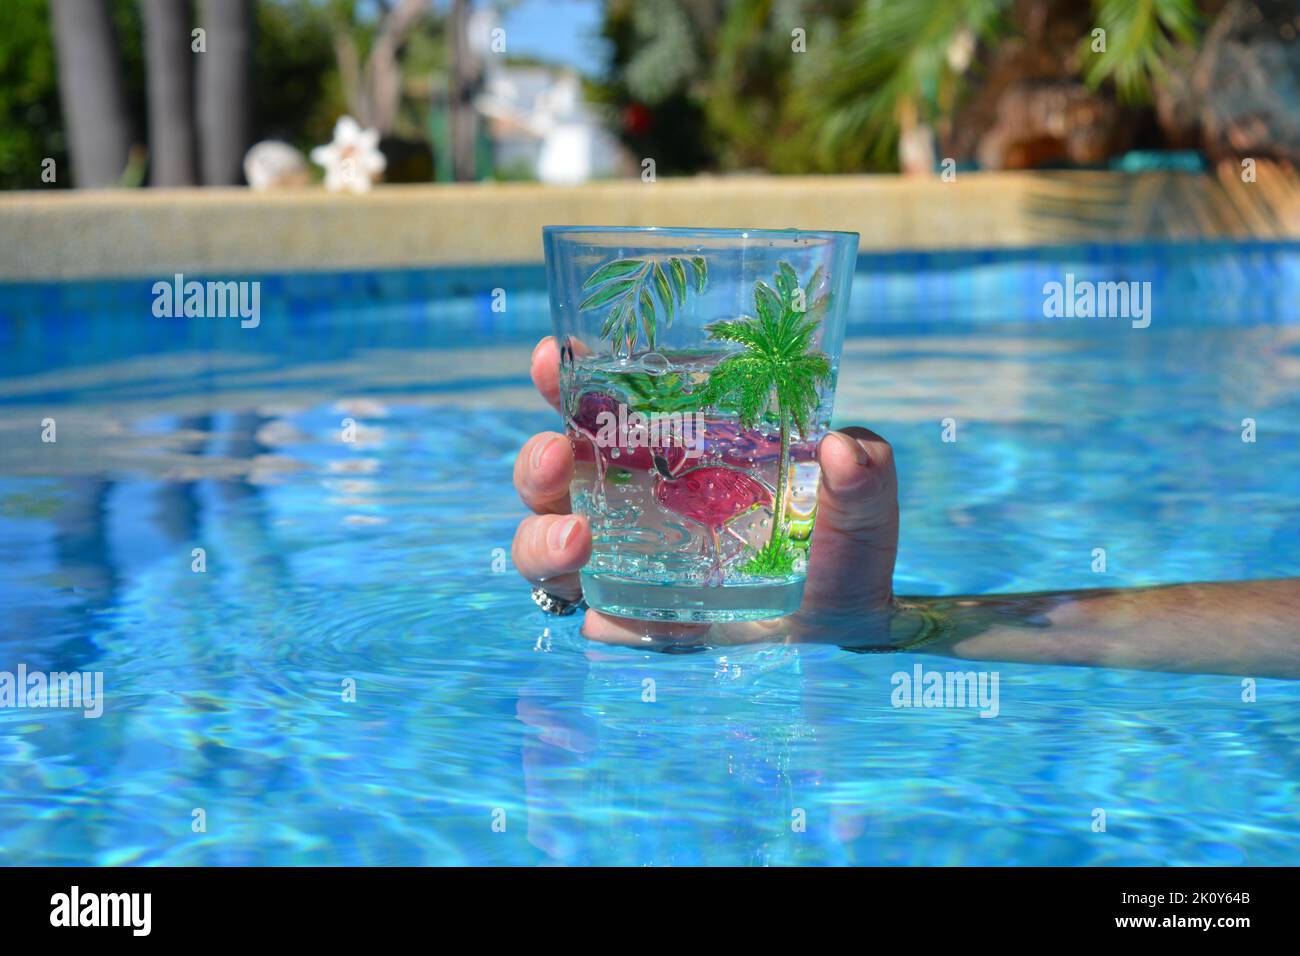 Refreshing drink held in hand, in swimming pool Stock Photo